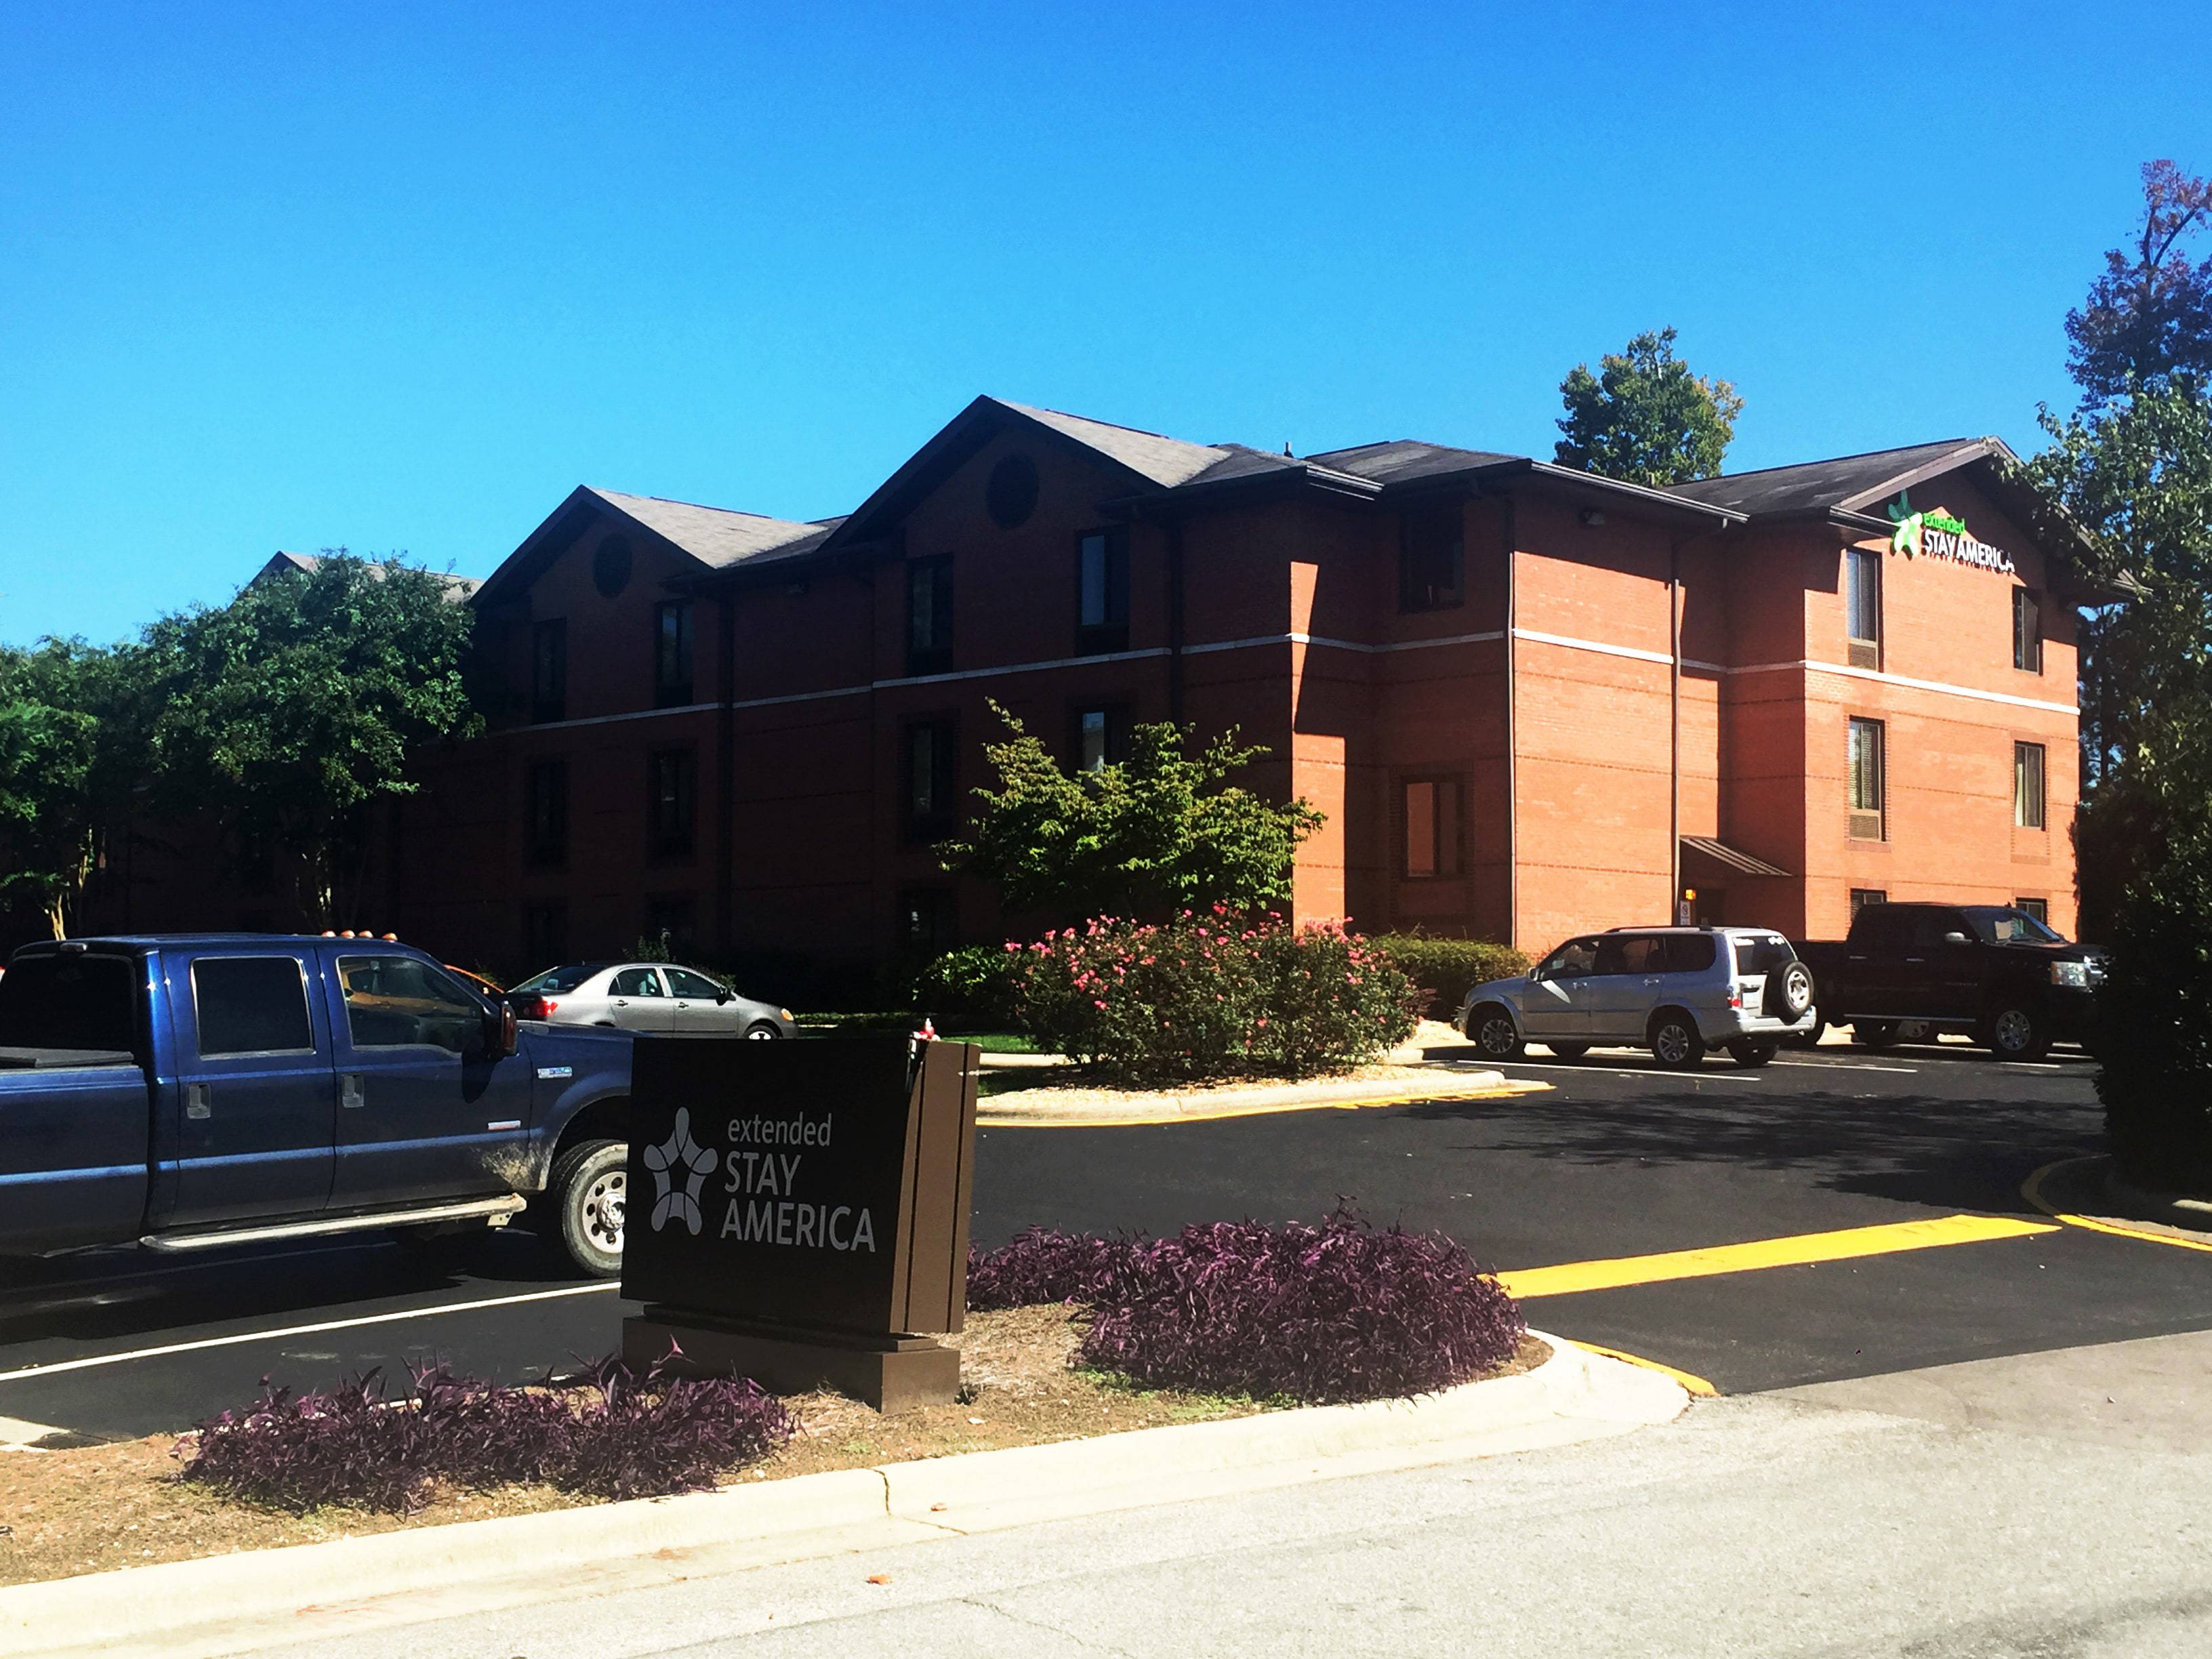 Photo of Extended Stay America - Raleigh - Cary - Regency Parkway South, Cary, NC